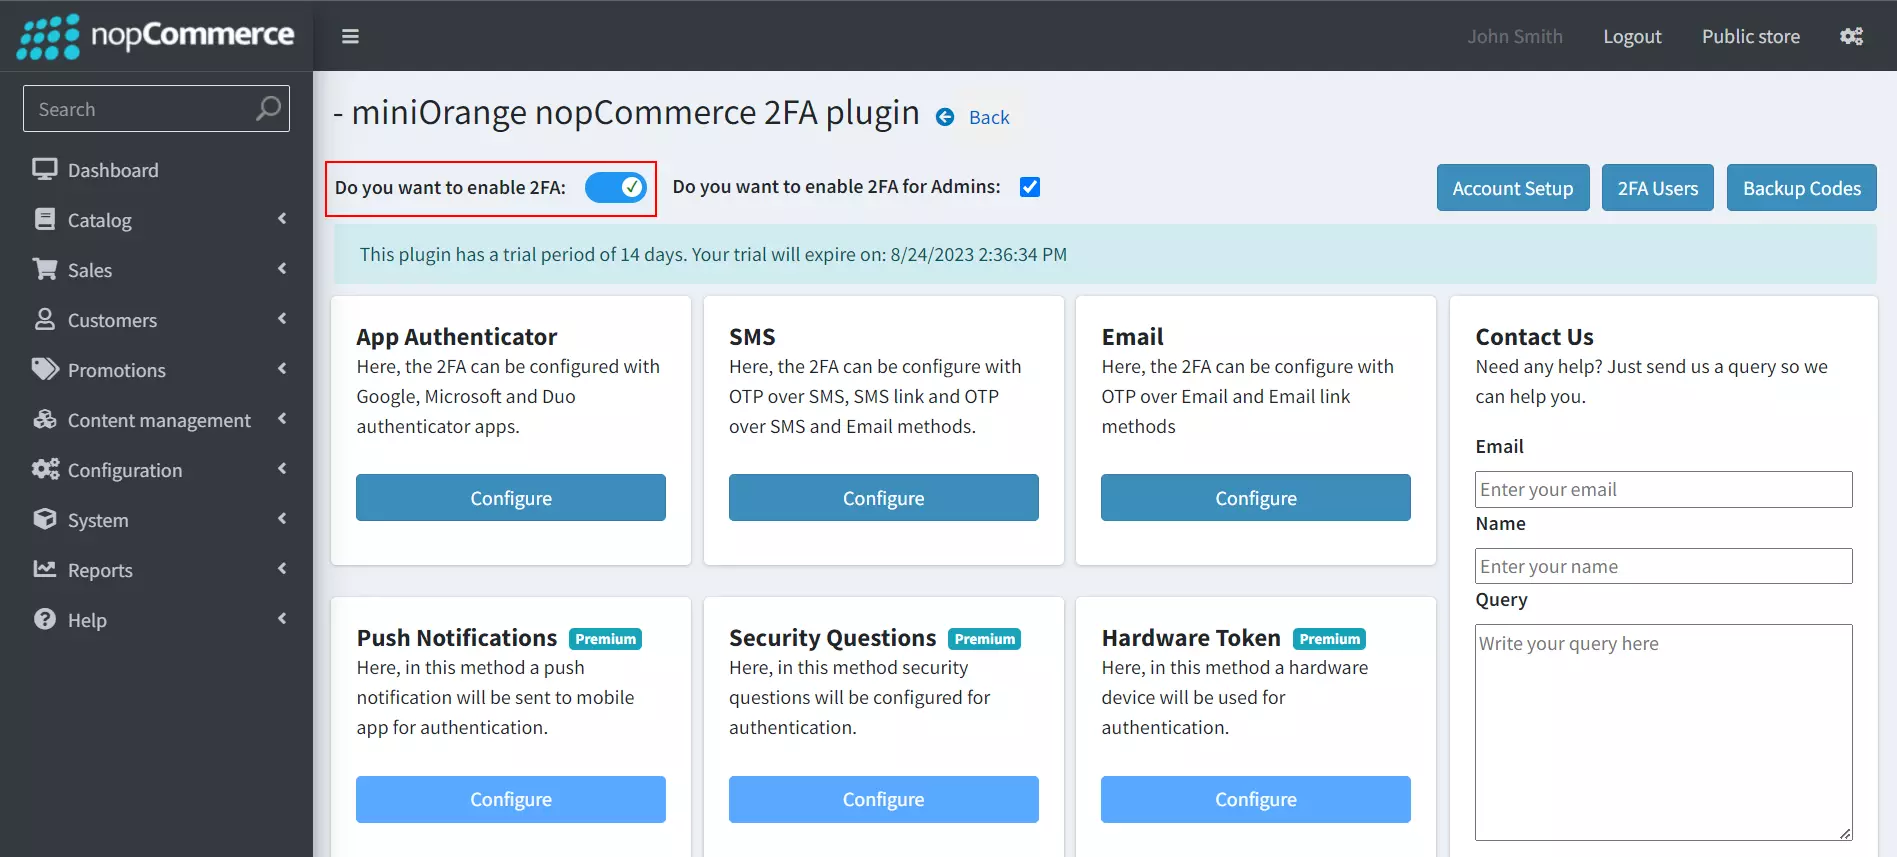 nopCommerce Two-factor Authentication using Microsoft Authenticator | nopCommerce 2FA - Enable nopCommerce 2FA for users